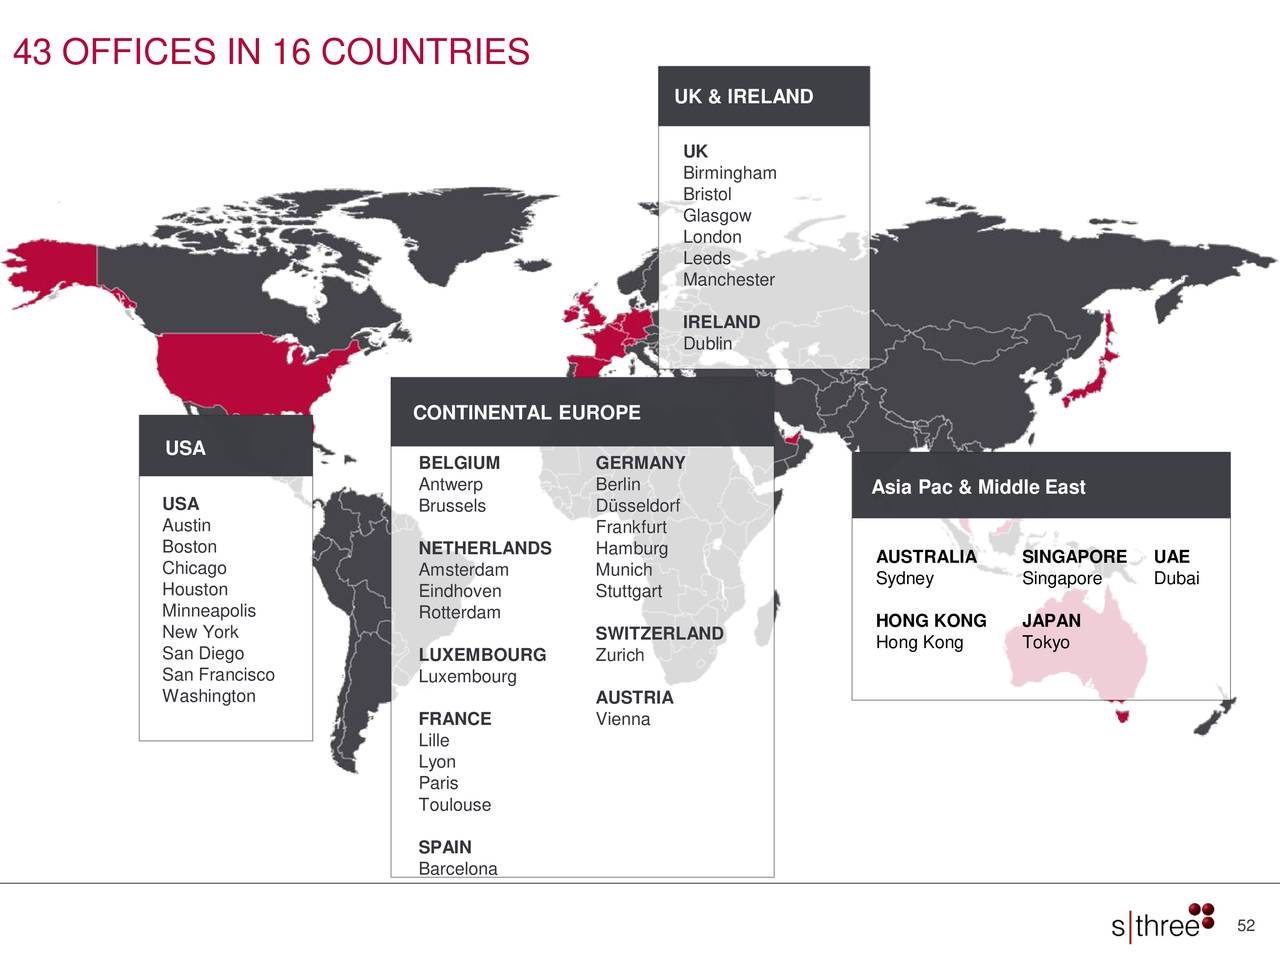 43 OFFICES IN 16 COUNTRIES